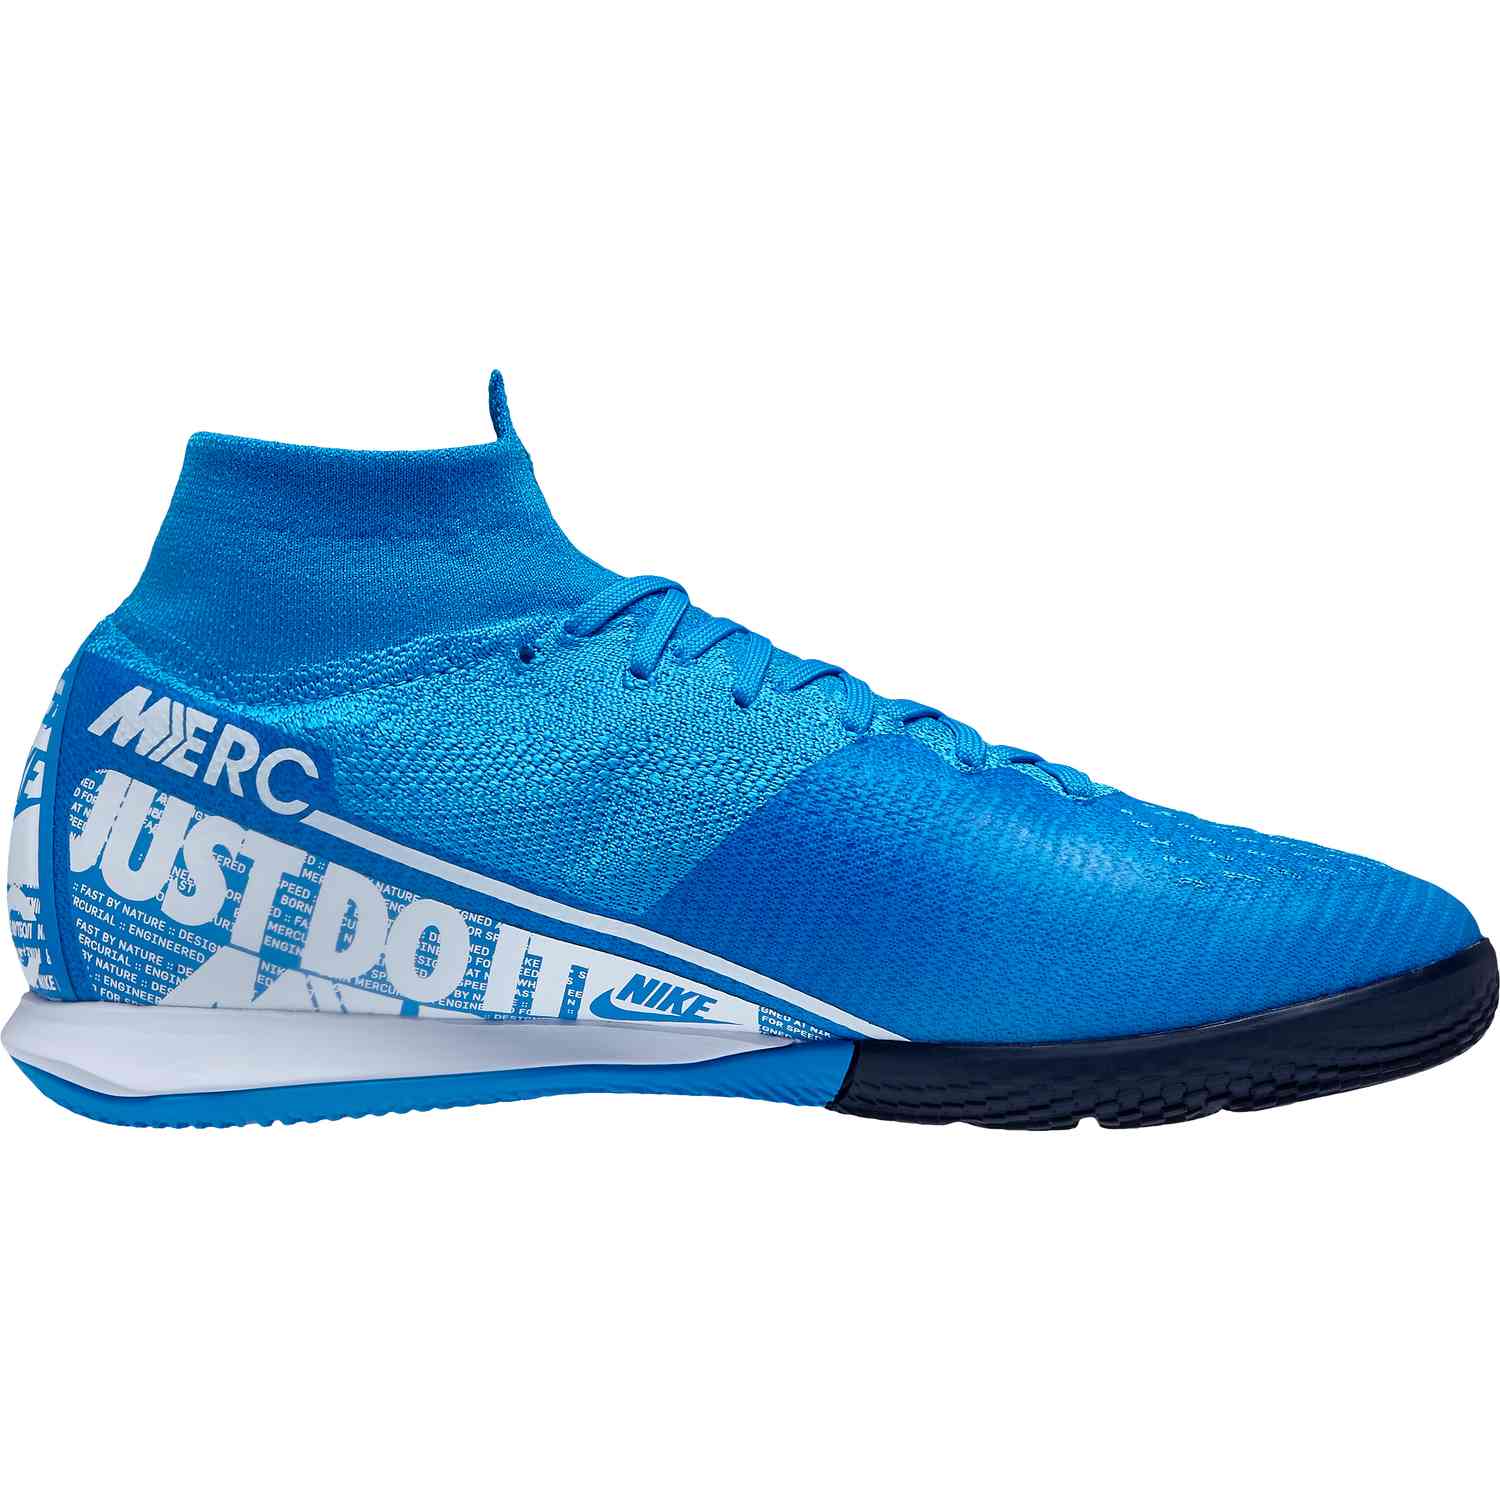 Details about SUPERFLY 7 ELITE MDS TF SIZE 10 in 2020.